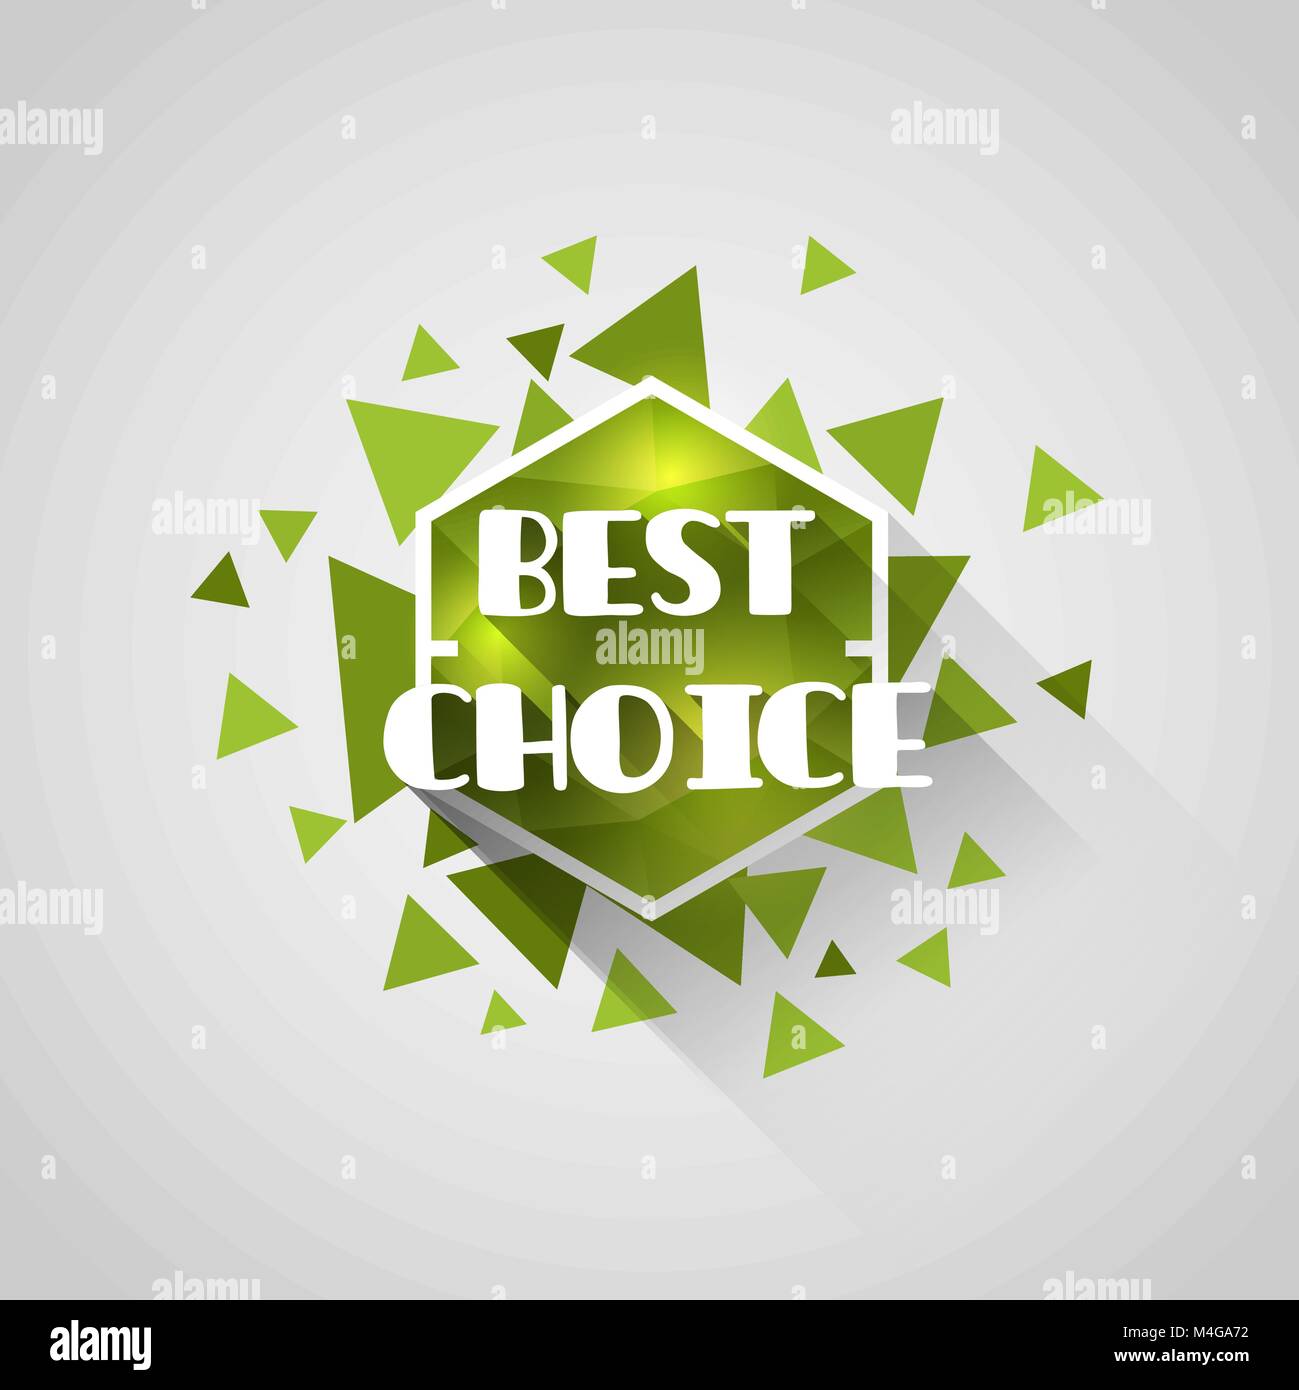 best choice green polygonal crystal tag with abstract triangle elements Stock Vector